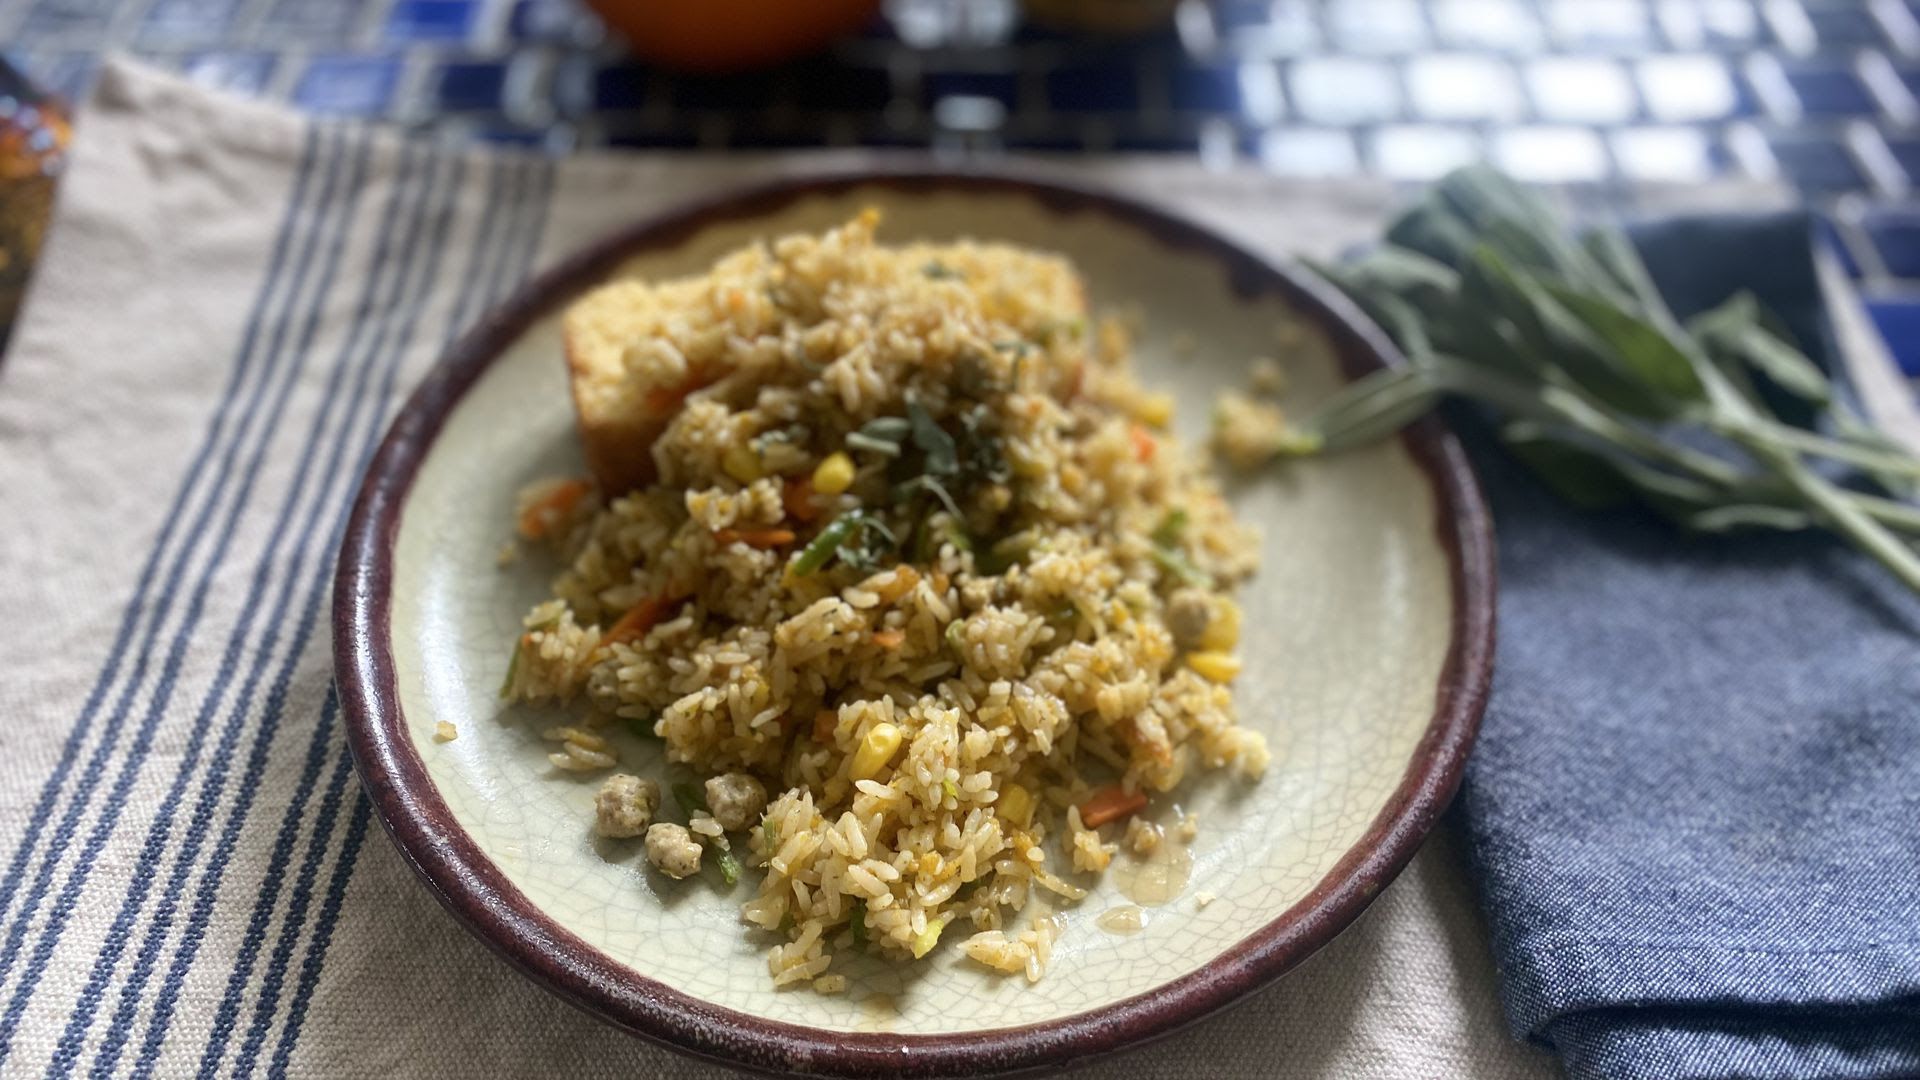 The disappointing Turkey Sausage Stuffing Fried Rice from Trader Joe's. 